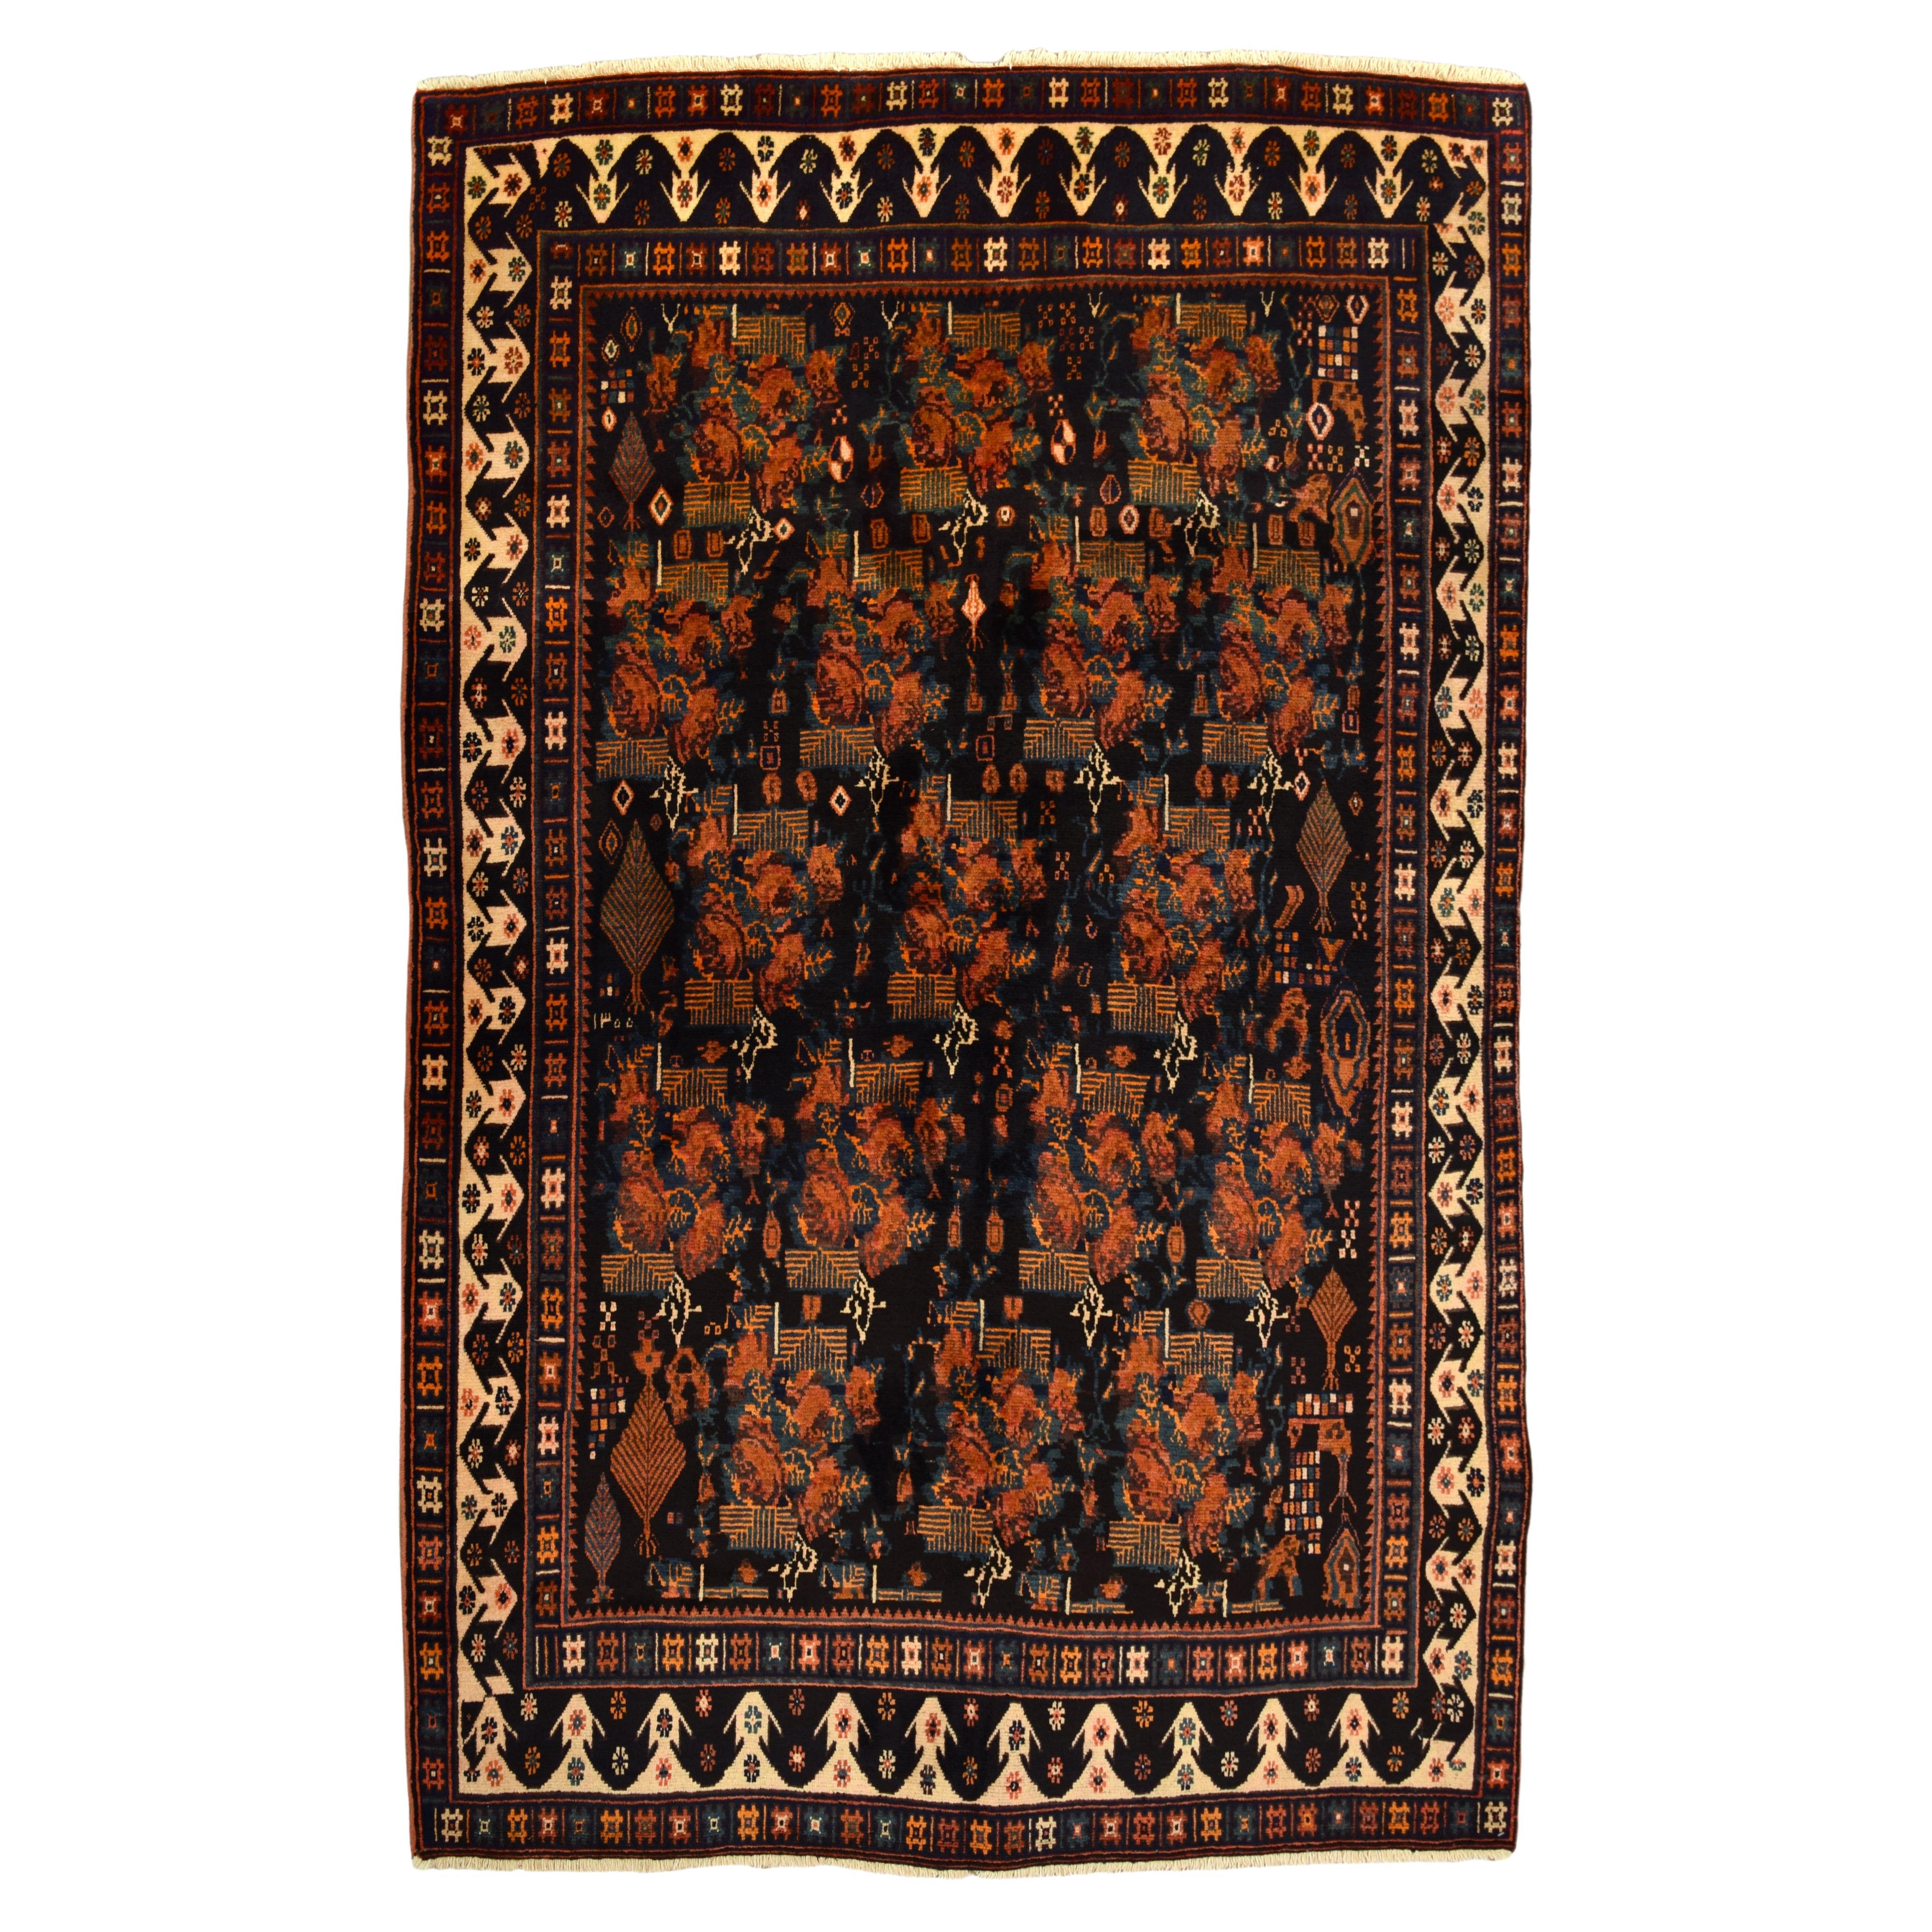 Semi-Antique Afshar, Red and Indigo Wool, Hand-Woven Persian Area Rug, 5' x 7'